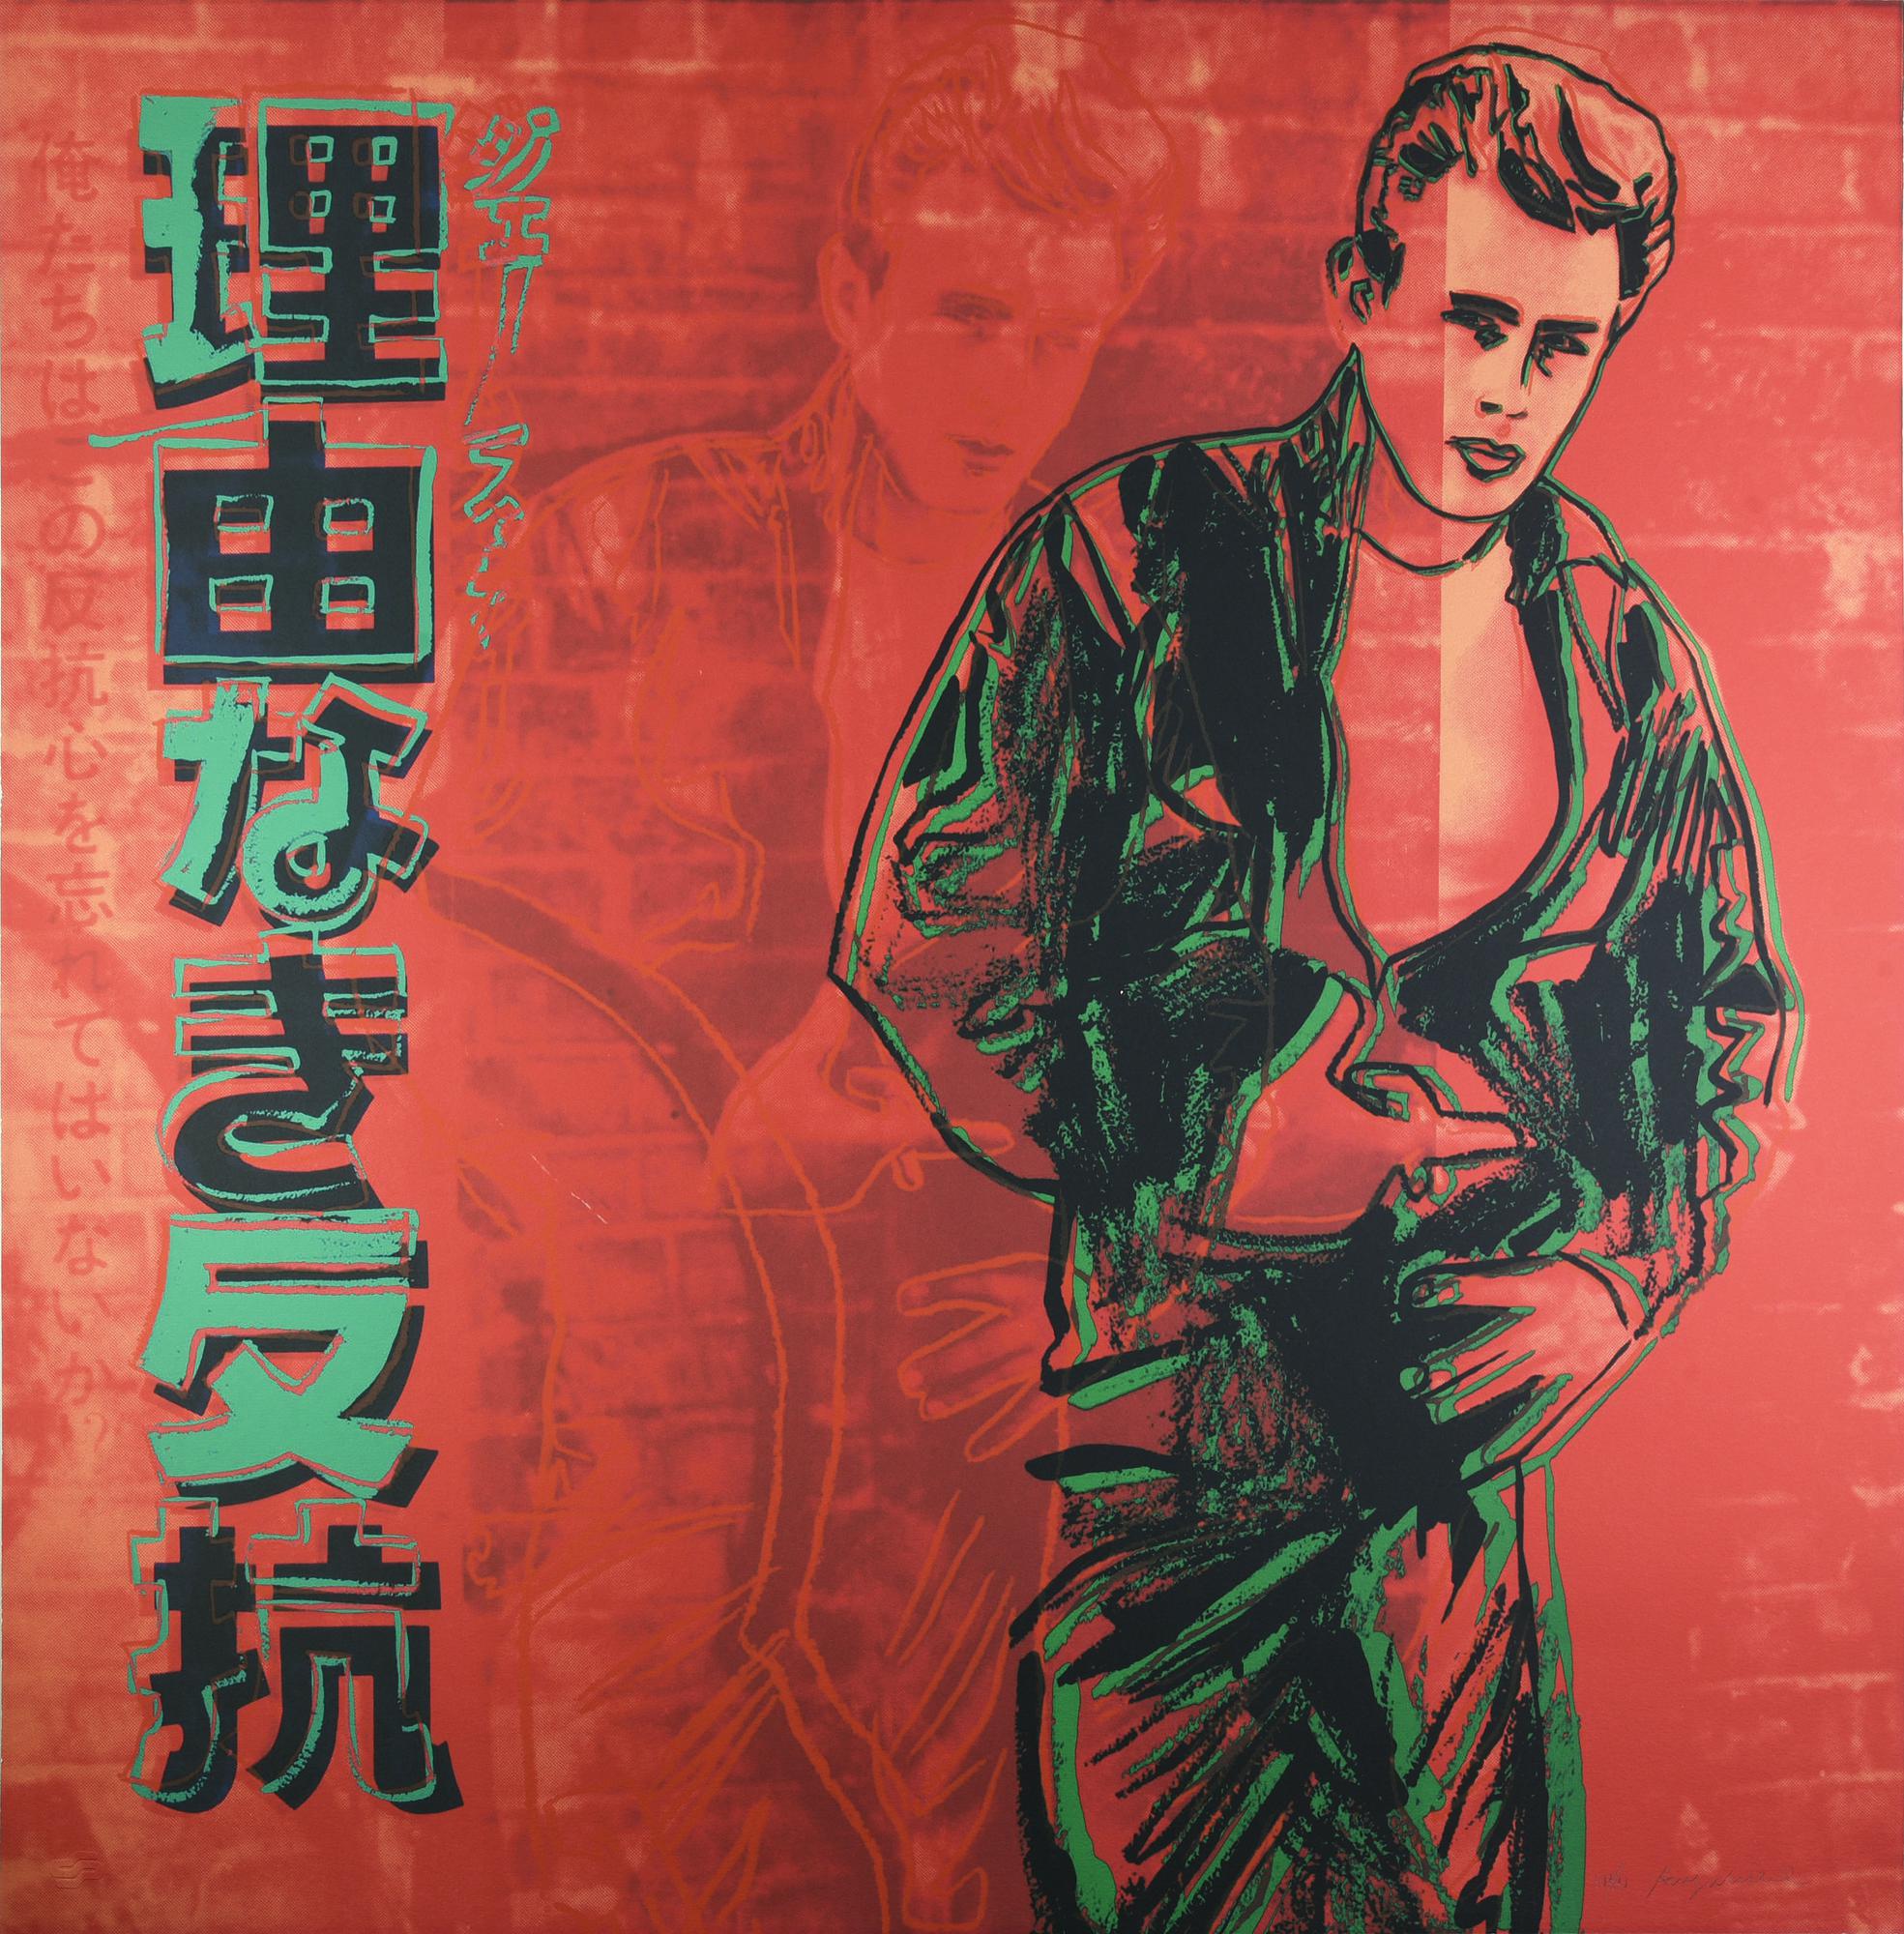 Andy Warhol (1928 - 1987) REBEL WITHOUT A CAUSE (JAMES DEAN), 1985...